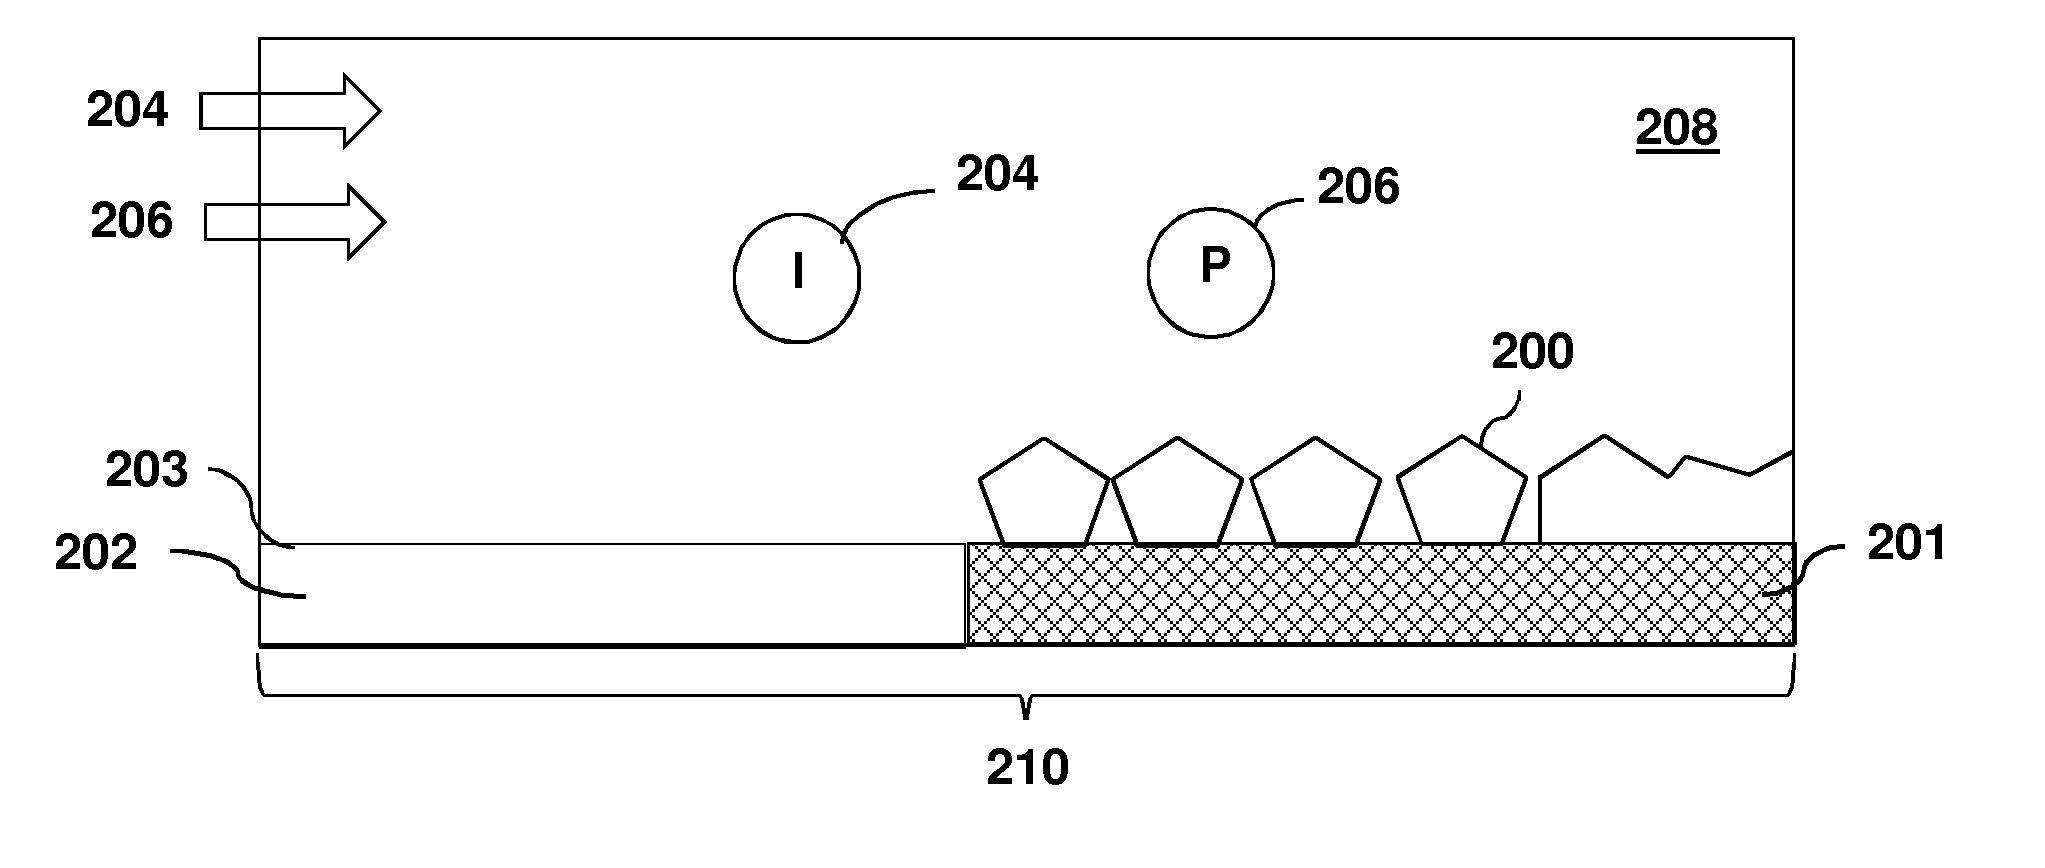 Use of an inhibitor molecule in chemical vapor deposition to afford deposition of copper on a metal substrate with no deposition on adjacent sio2 substrate